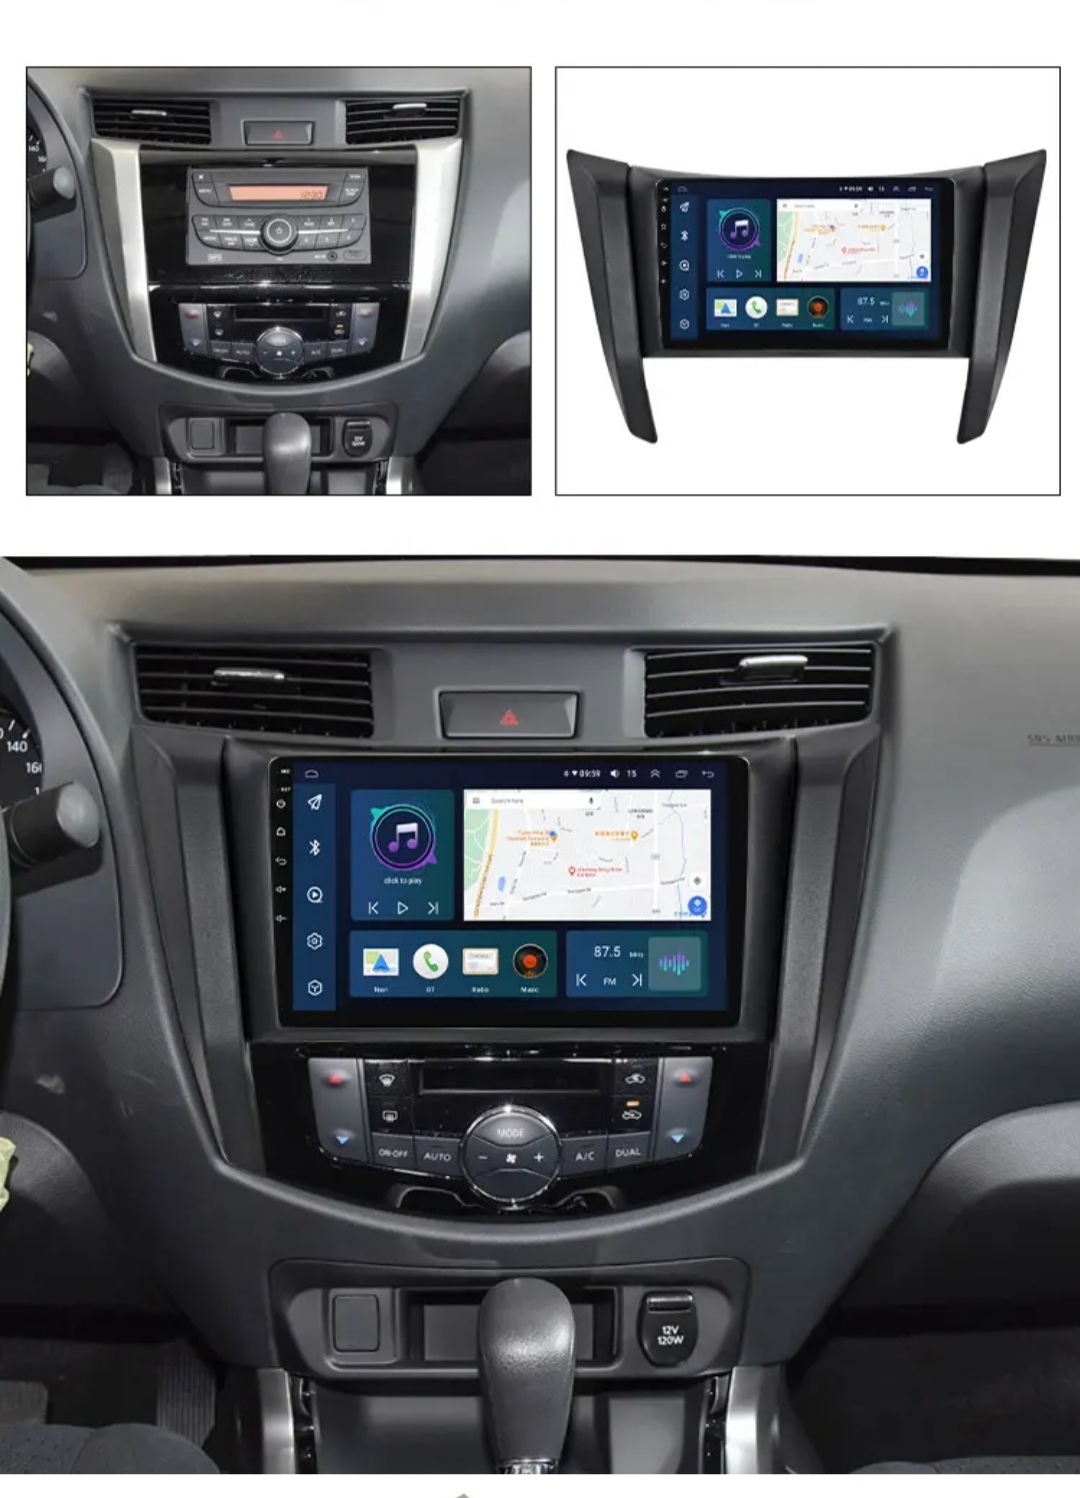 9"android 11,,bilstereo NISSAN Navara, NP300,FRONTIER(2017--2018) GPS WIFI CARPLAY ANDROID AUTO BLÅTAND RDS DSP ROM:32GB RAM: 2GB,4G LTE